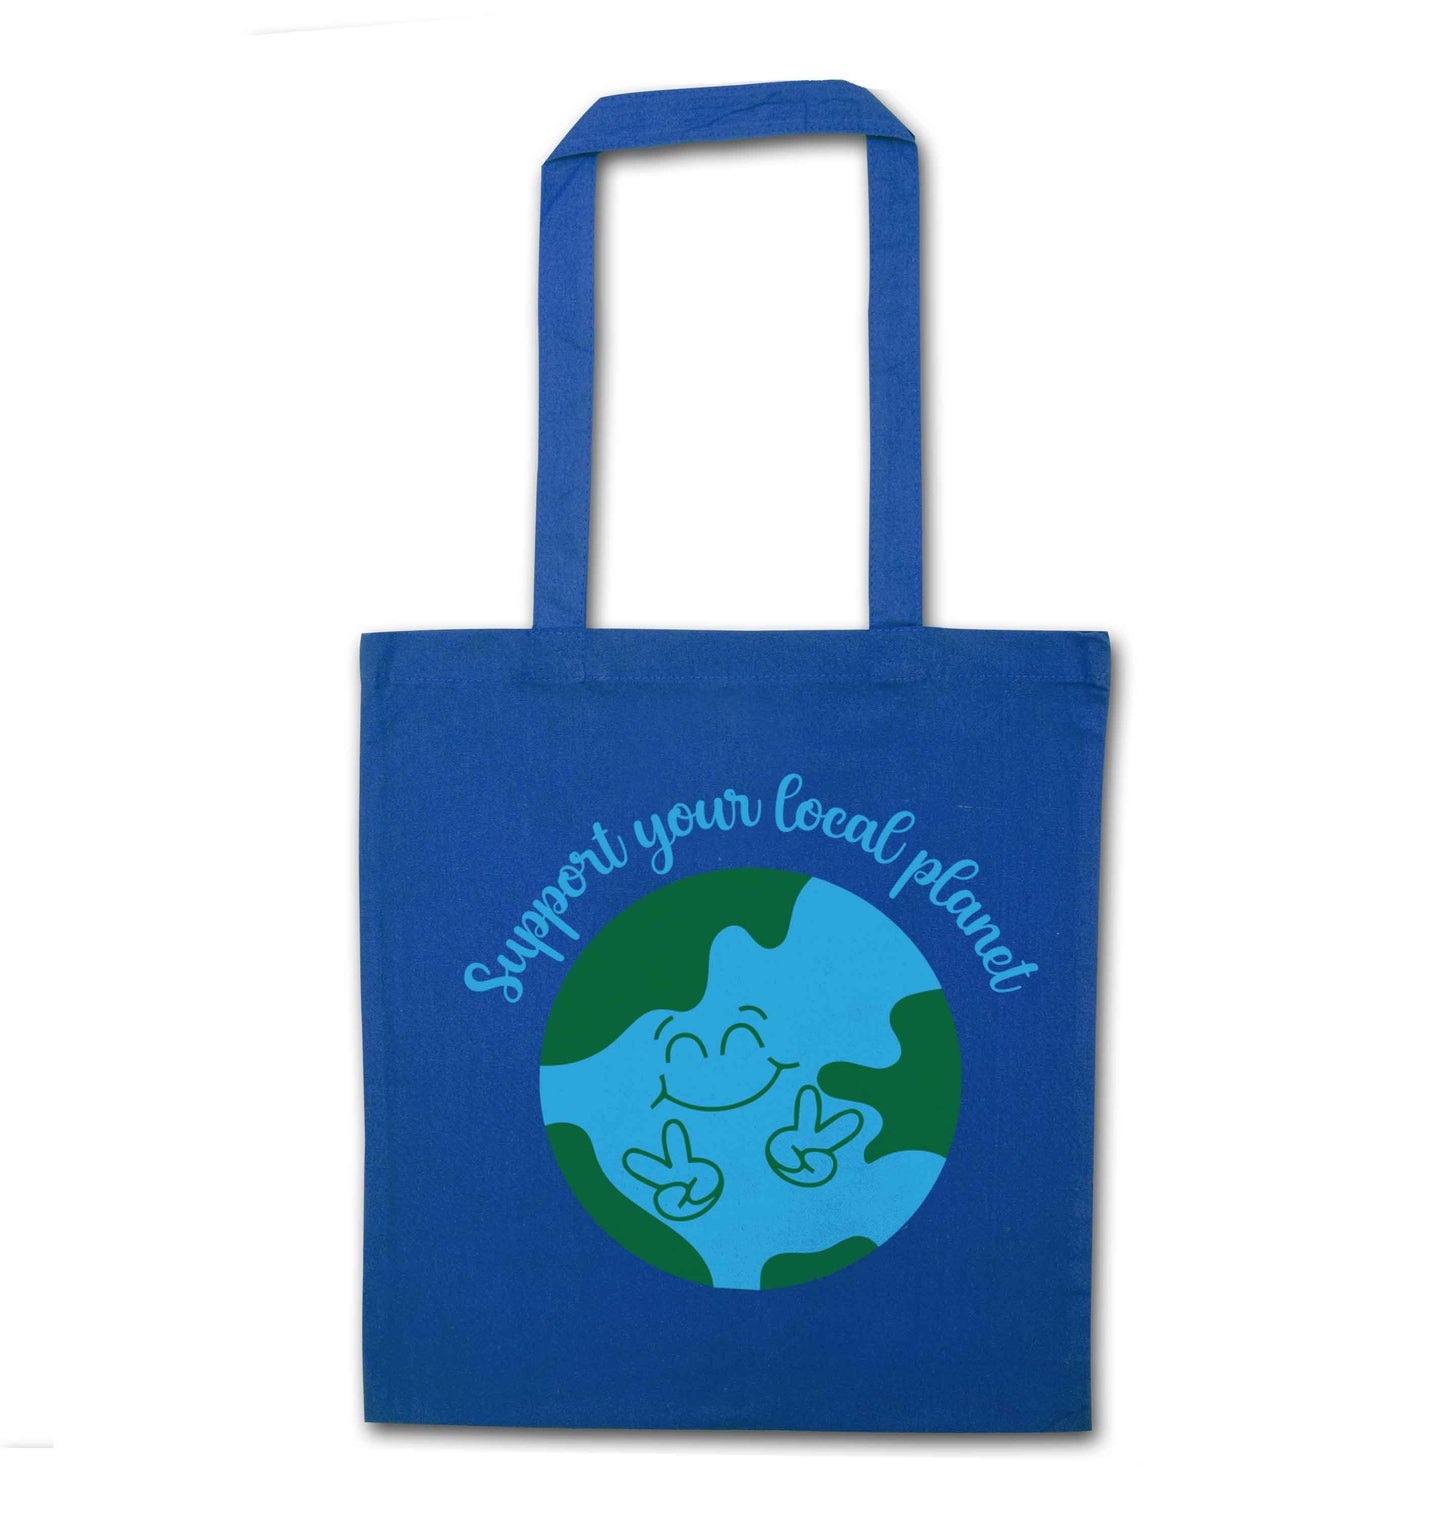 Support your local planet blue tote bag